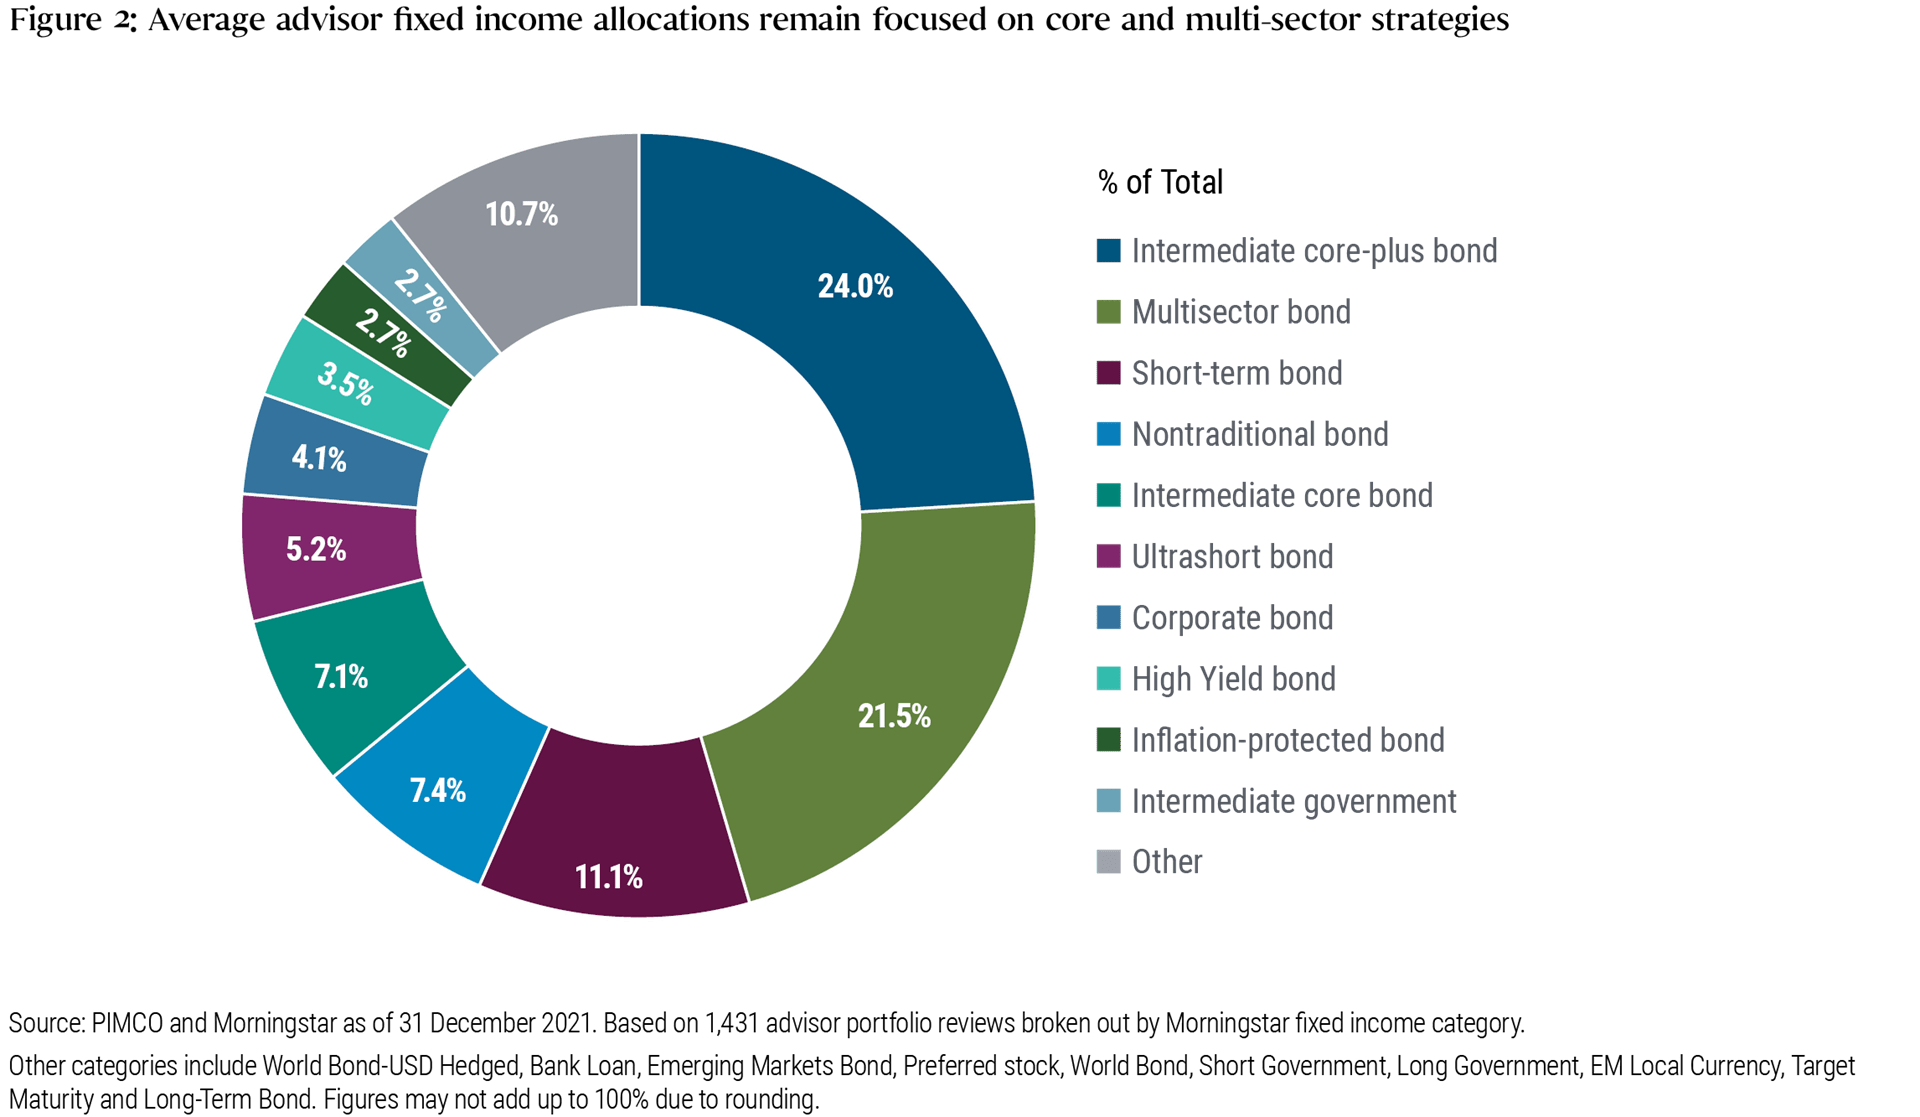 Figure 2 is a pie chart showing the average advisor’s fixed income portfolio allocation in 2021. It shows that allocations remain focused on core and multi-sector strategies. For example, intermediate core-plus bonds made up 24% of the total allocation, followed by multisector bonds at 21.5%, short-term bonds at 11.1%, and nontraditional bonds at 7.4%. Inflation-protected bonds and intermediate government bonds had the lowest allocations at 2.7% each. The data is based on PIMCO and Morningstar as of 31 December 2021 and takes into account 1,431 advisor portfolio reviews broken out by Morningstar fixed income category. 